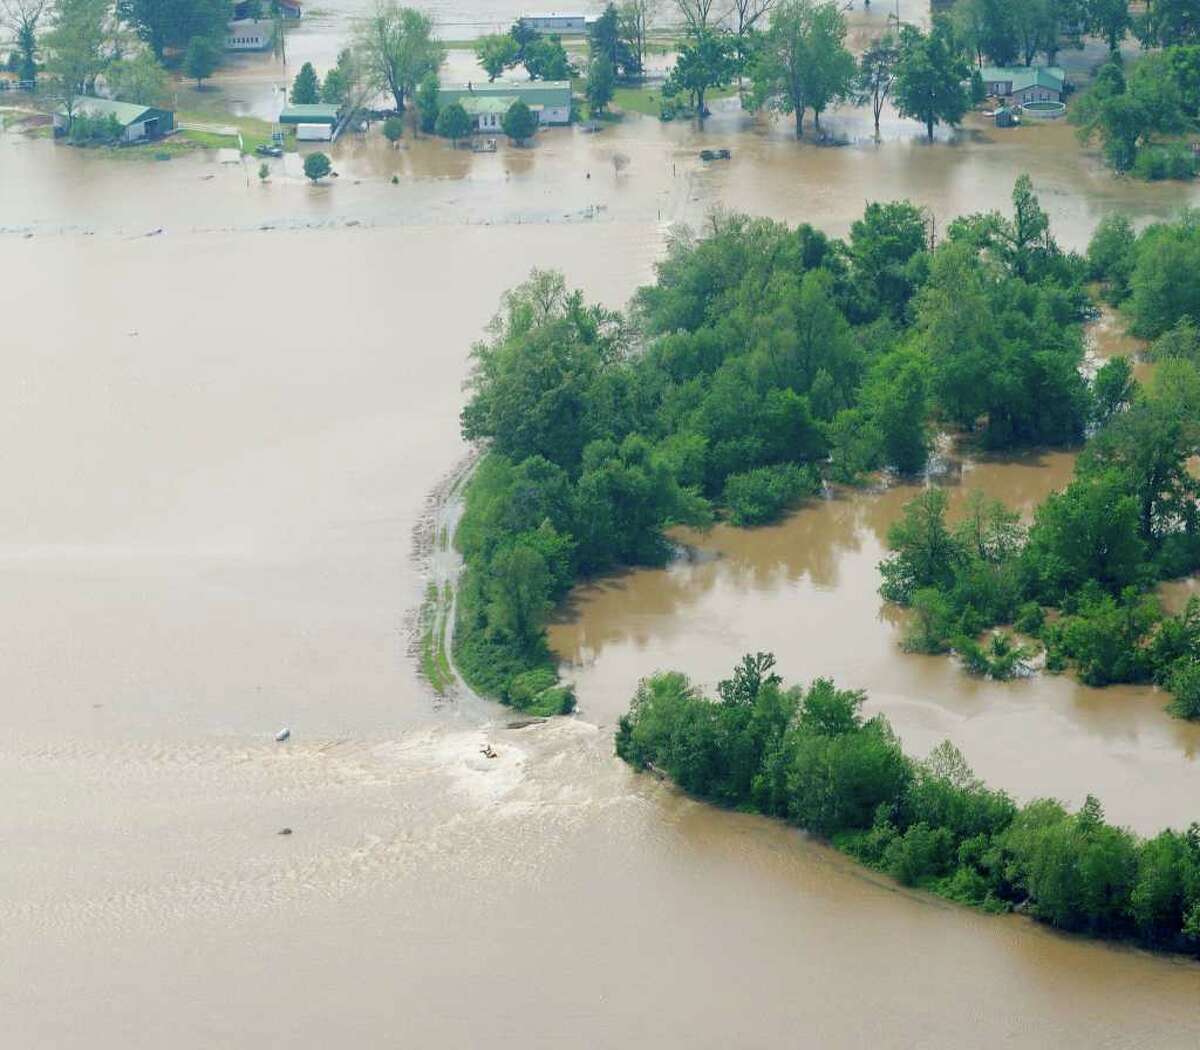 ASSOCIATED PRESS FILE MUCH WATER, BIG BILL: Water from the Black River flows through a breach in a levee near Poplar Bluff, Mo. Repairs to the levees may cost billions, federal officials say.